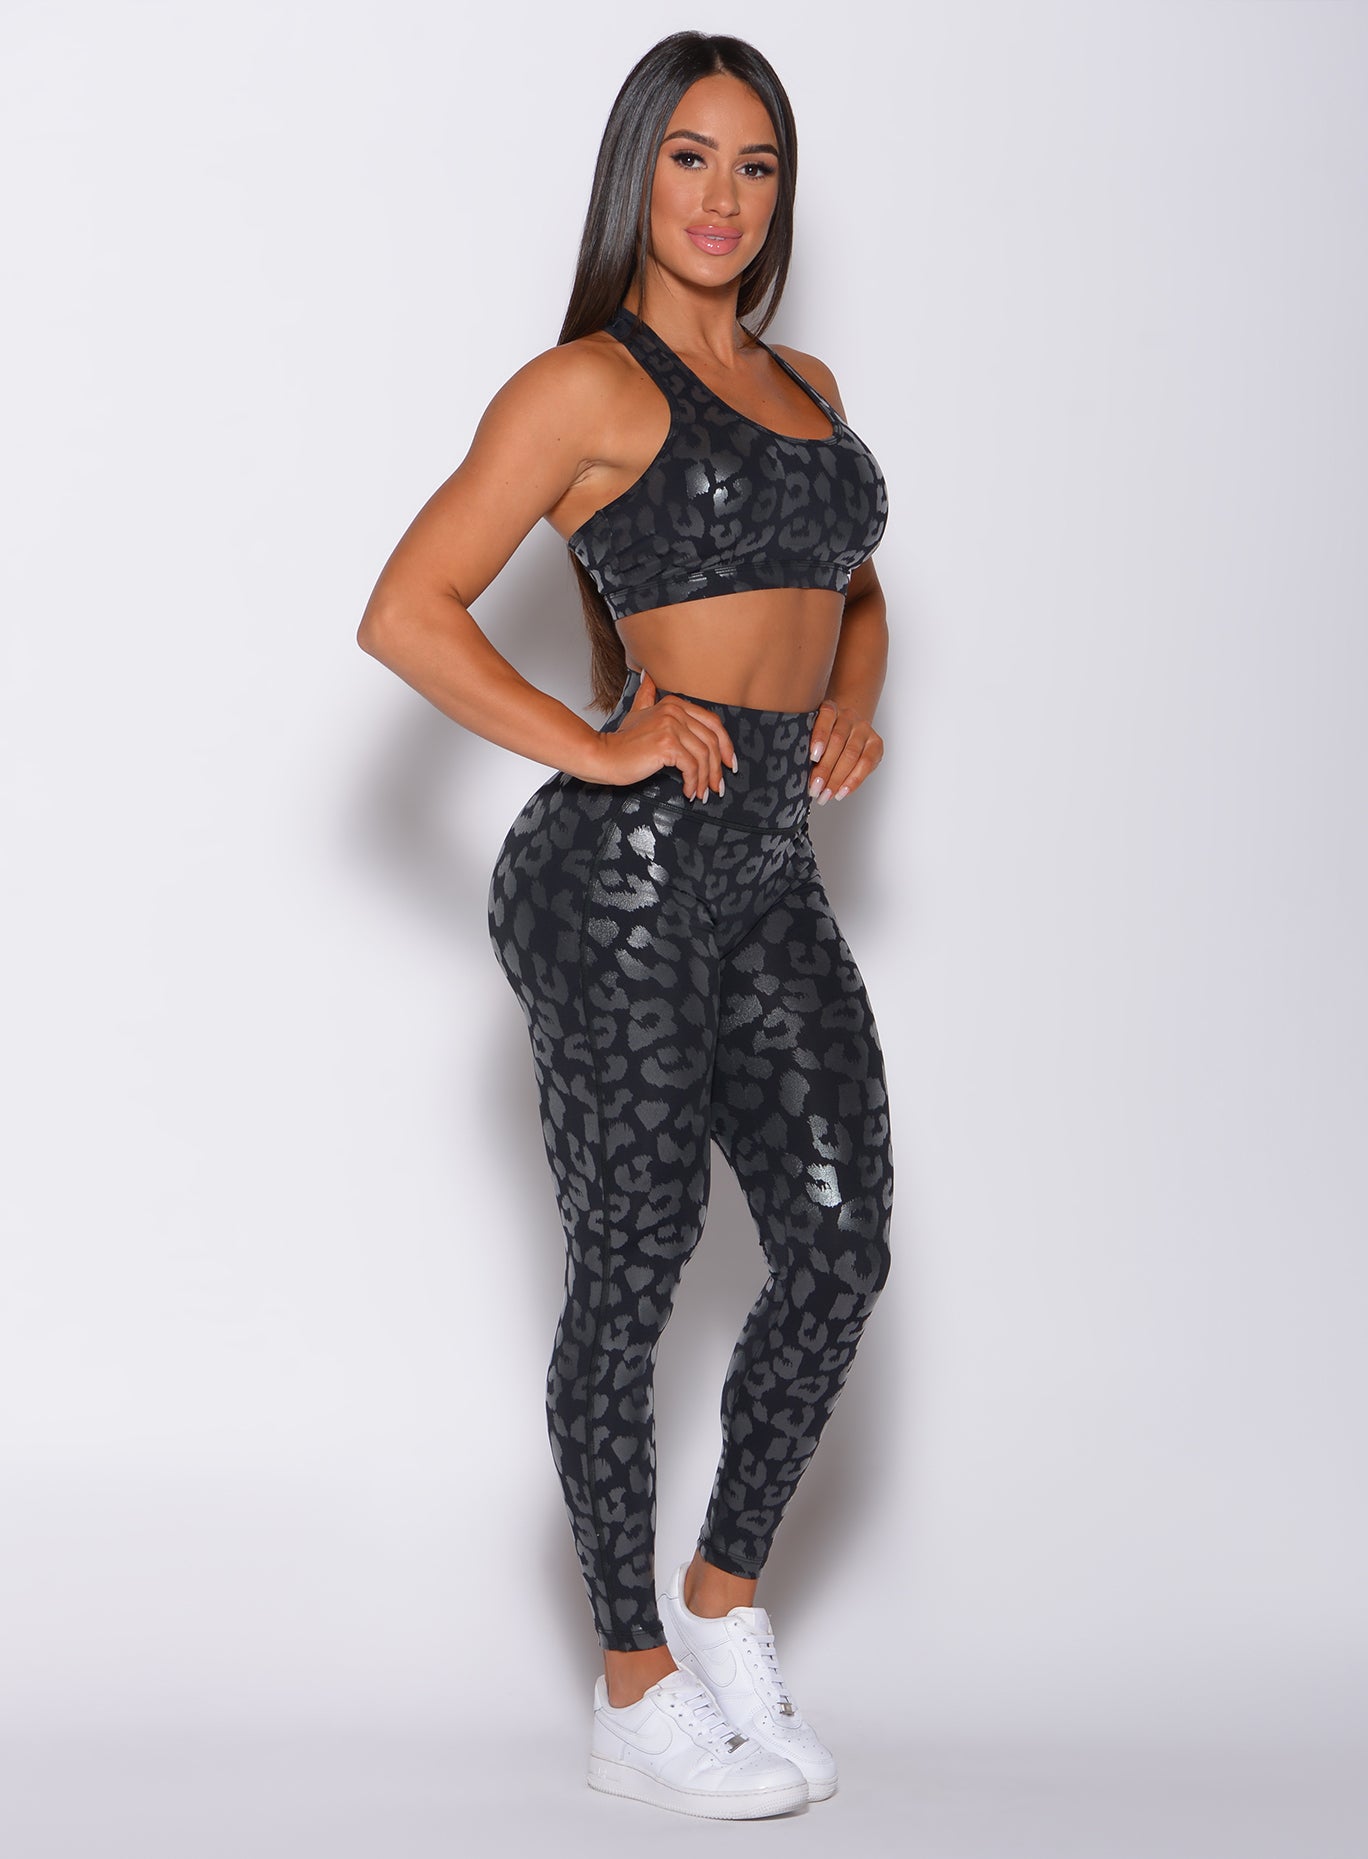 right side  profile view of a model facing to her right wearing our shine leopard leggings in Black Leopard color along with the matching sports bra